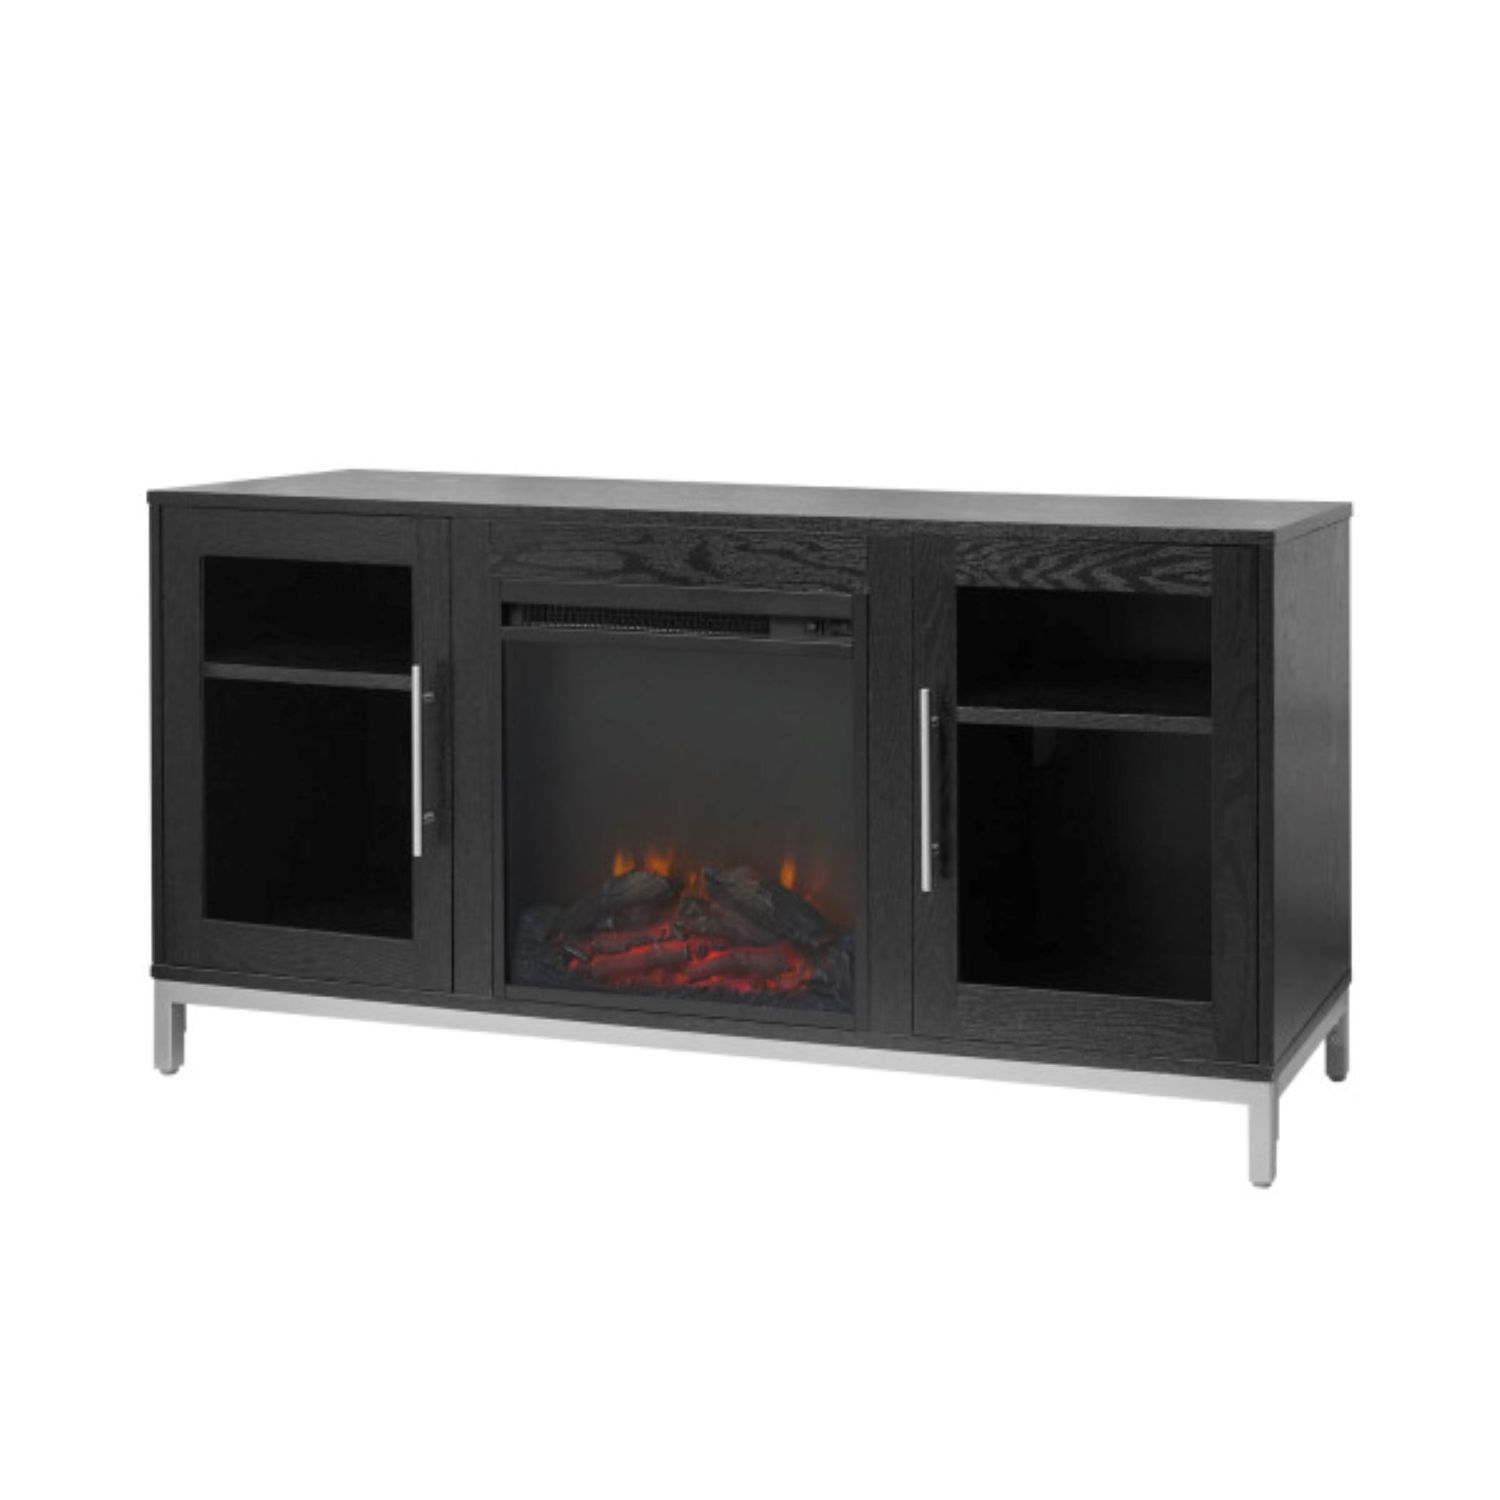 Image for Dream Collection Lainey Modern Electric Fireplace TV Stand at Kohl's.